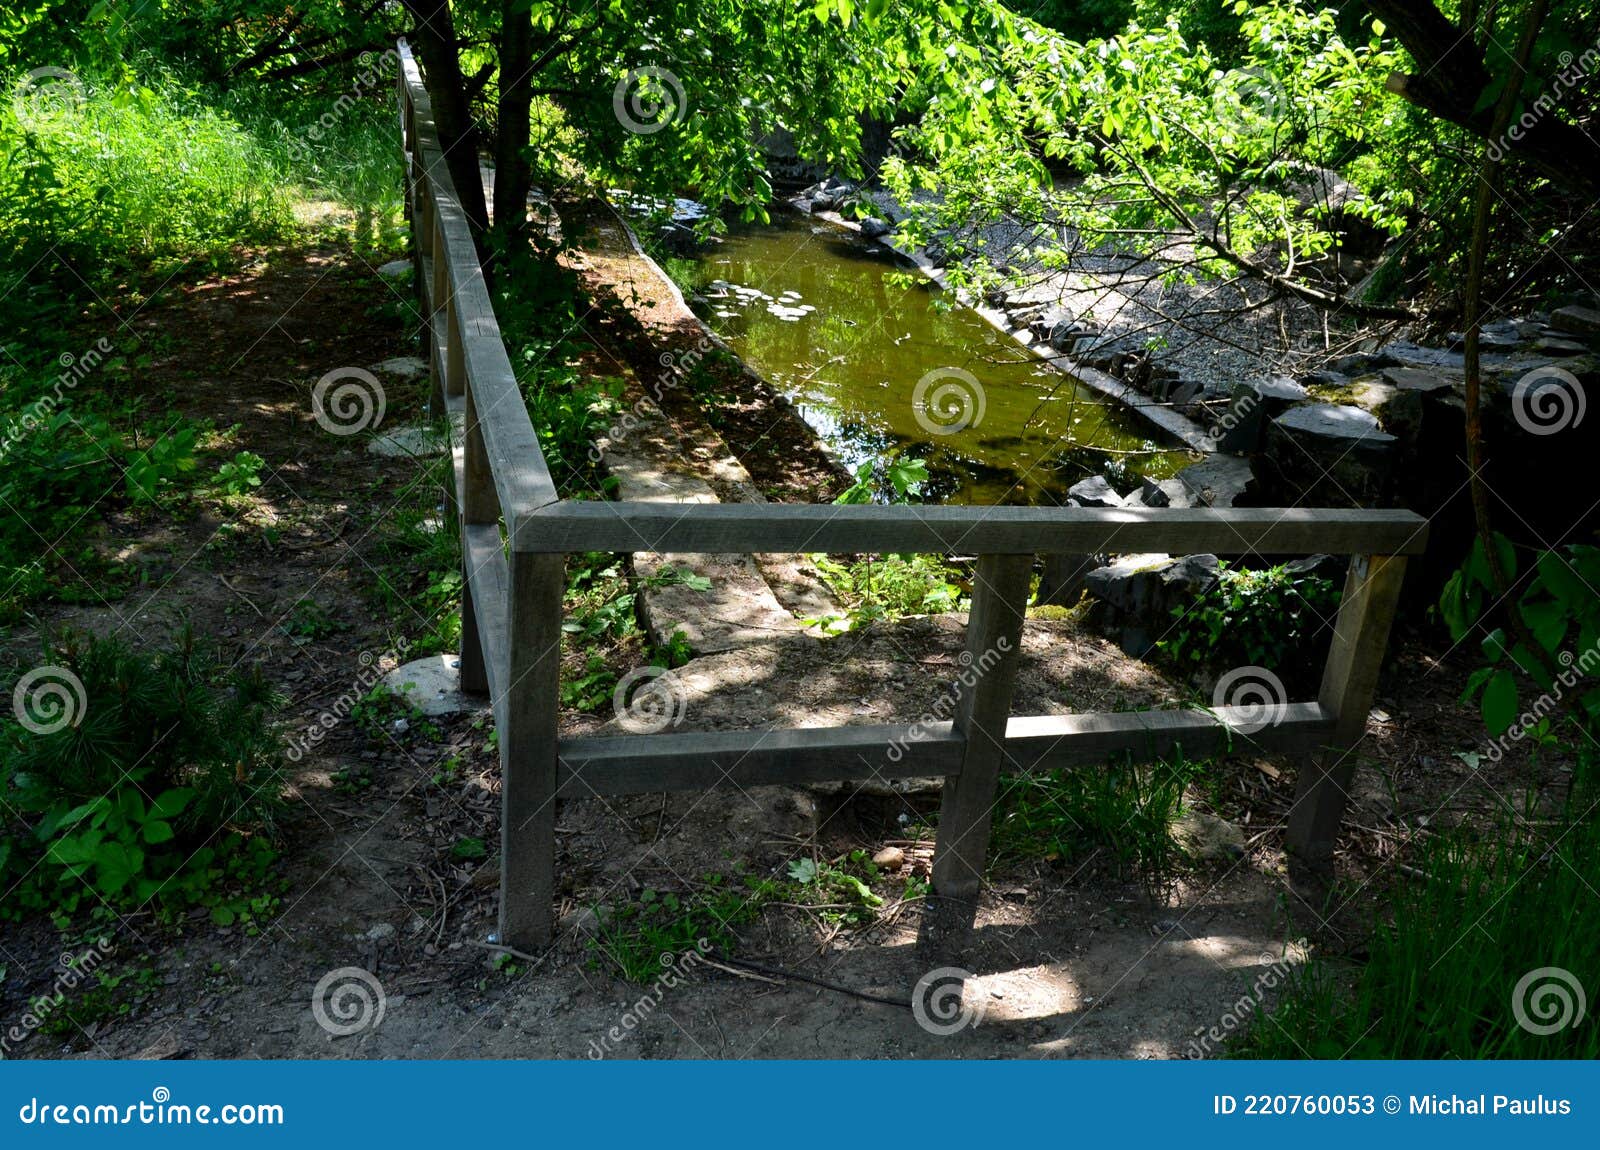 biozone for the reproduction of amphibians, frogs and newts in the city park is separated by a wooden railing on the shore